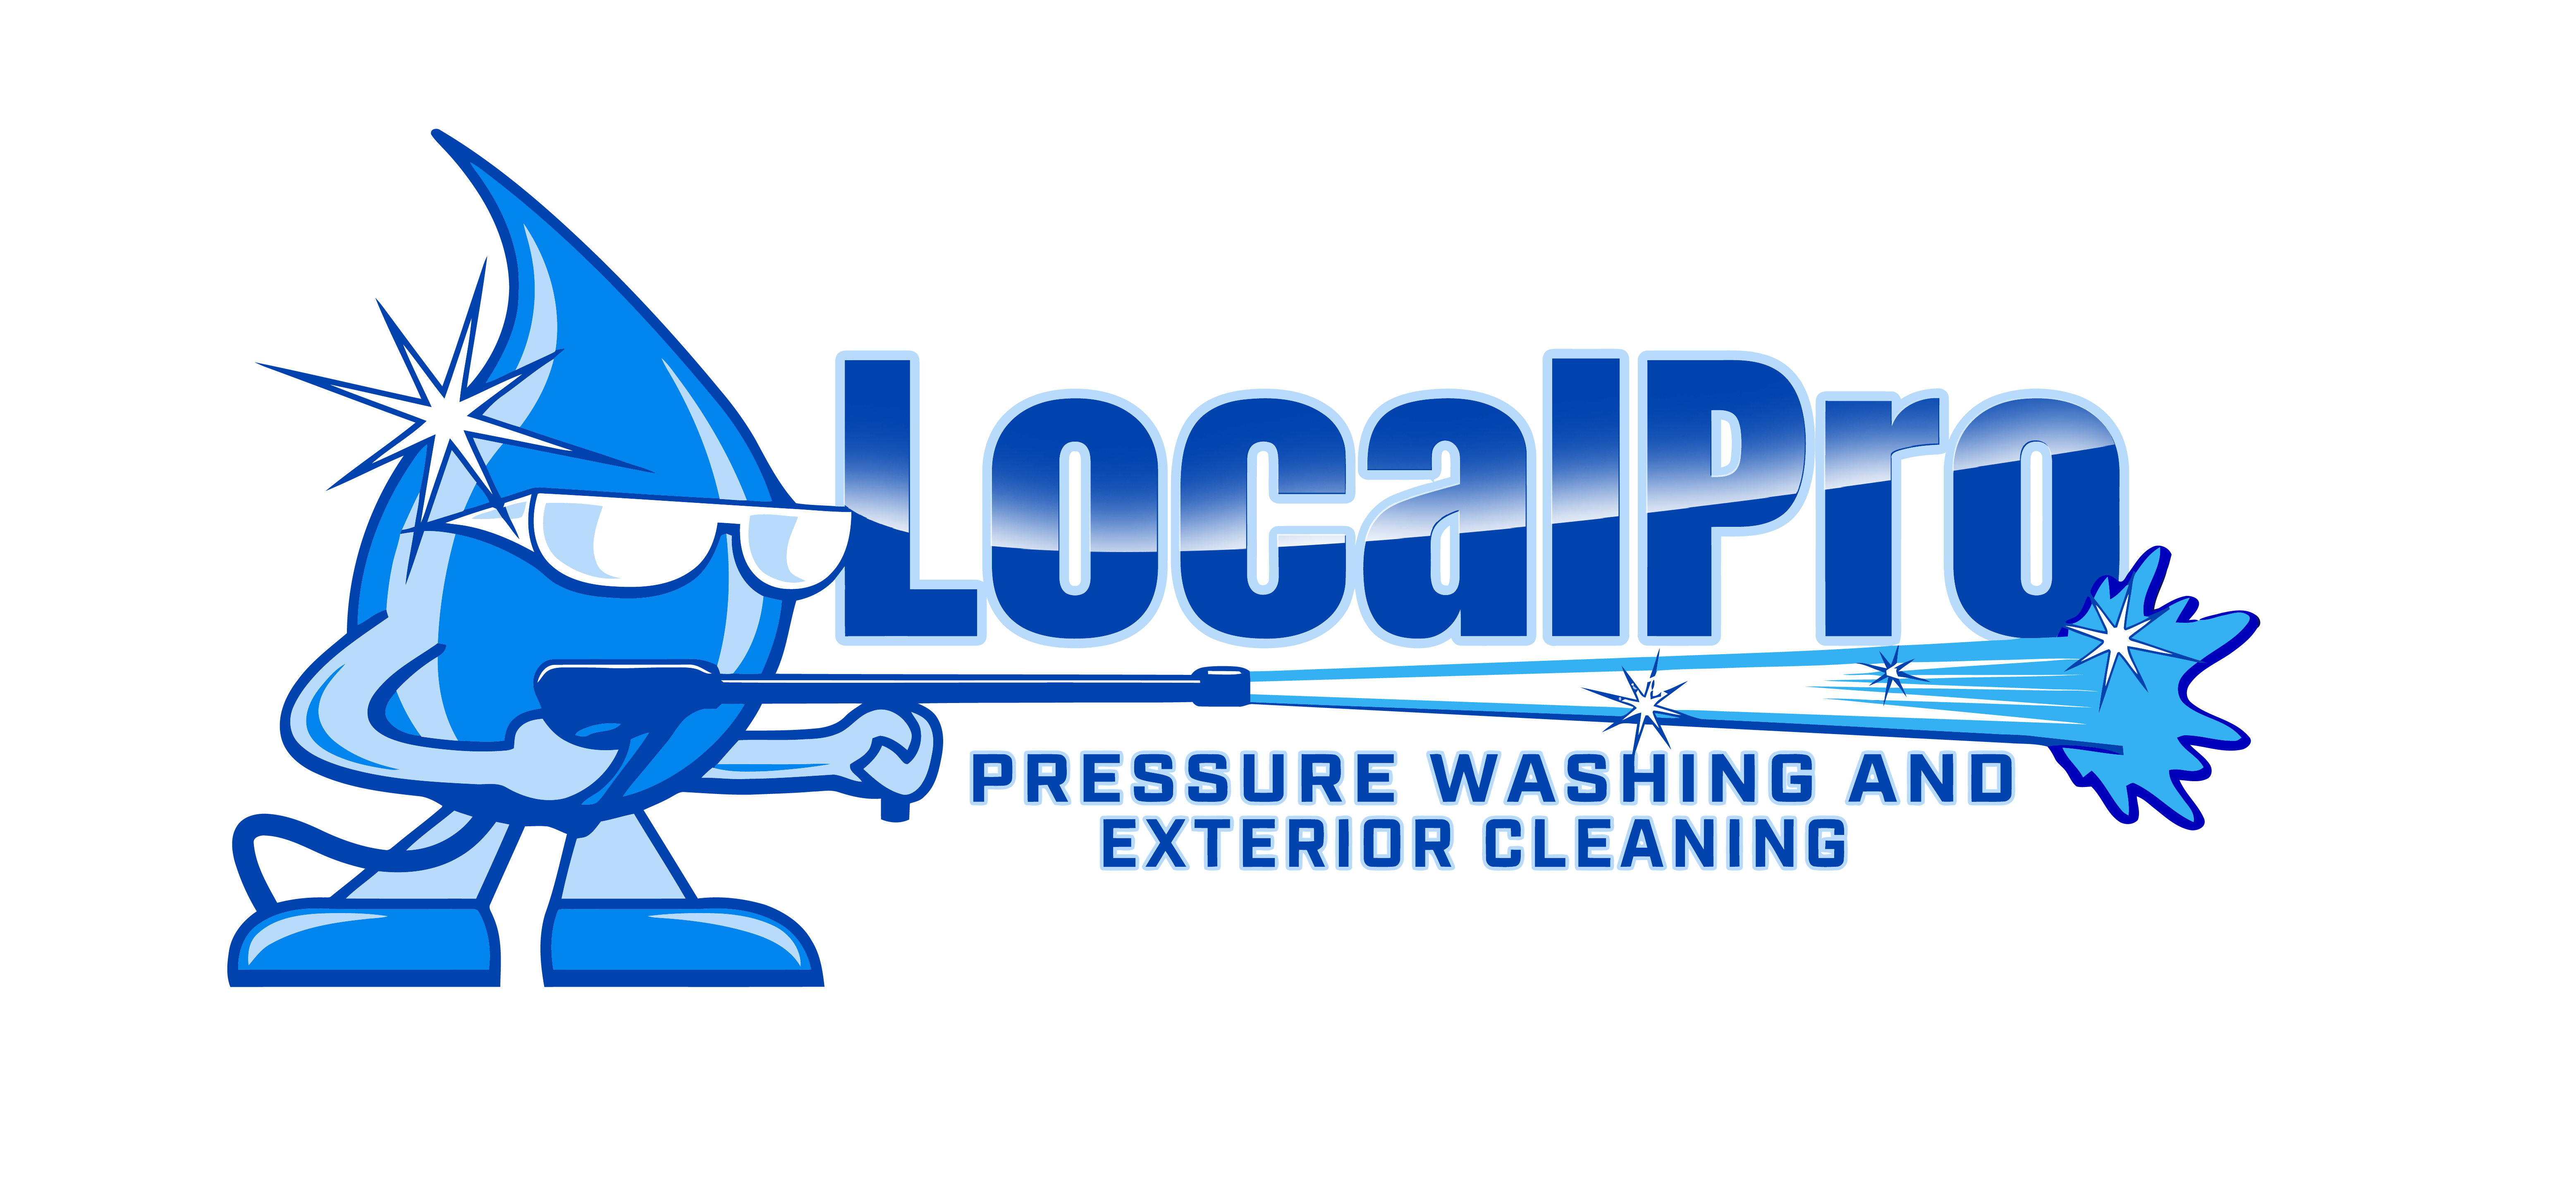 Pressure Washing and Exterior Cleaning | Local Pro Pressure Washing